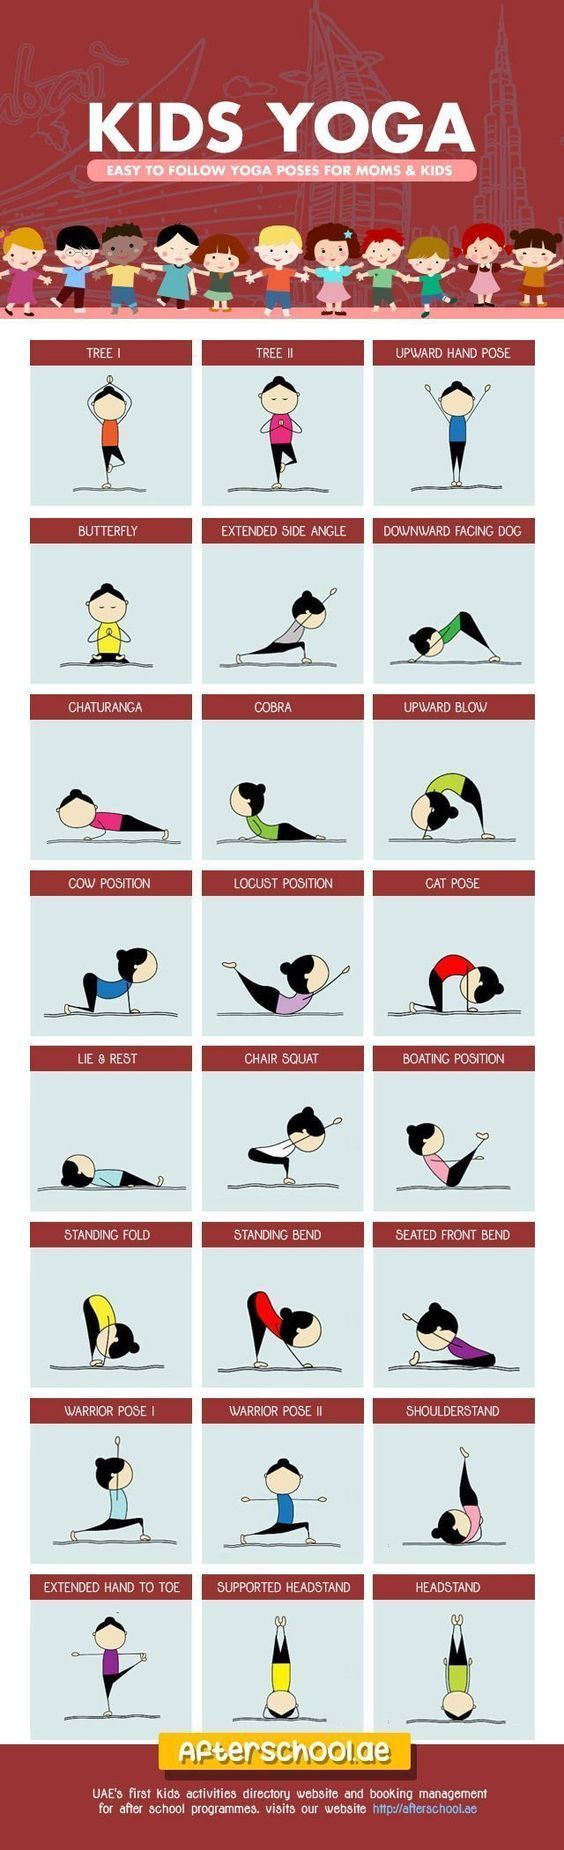 Yoga Positions Mom and Kids Could Try Together (Infographic) blog.afterschool......